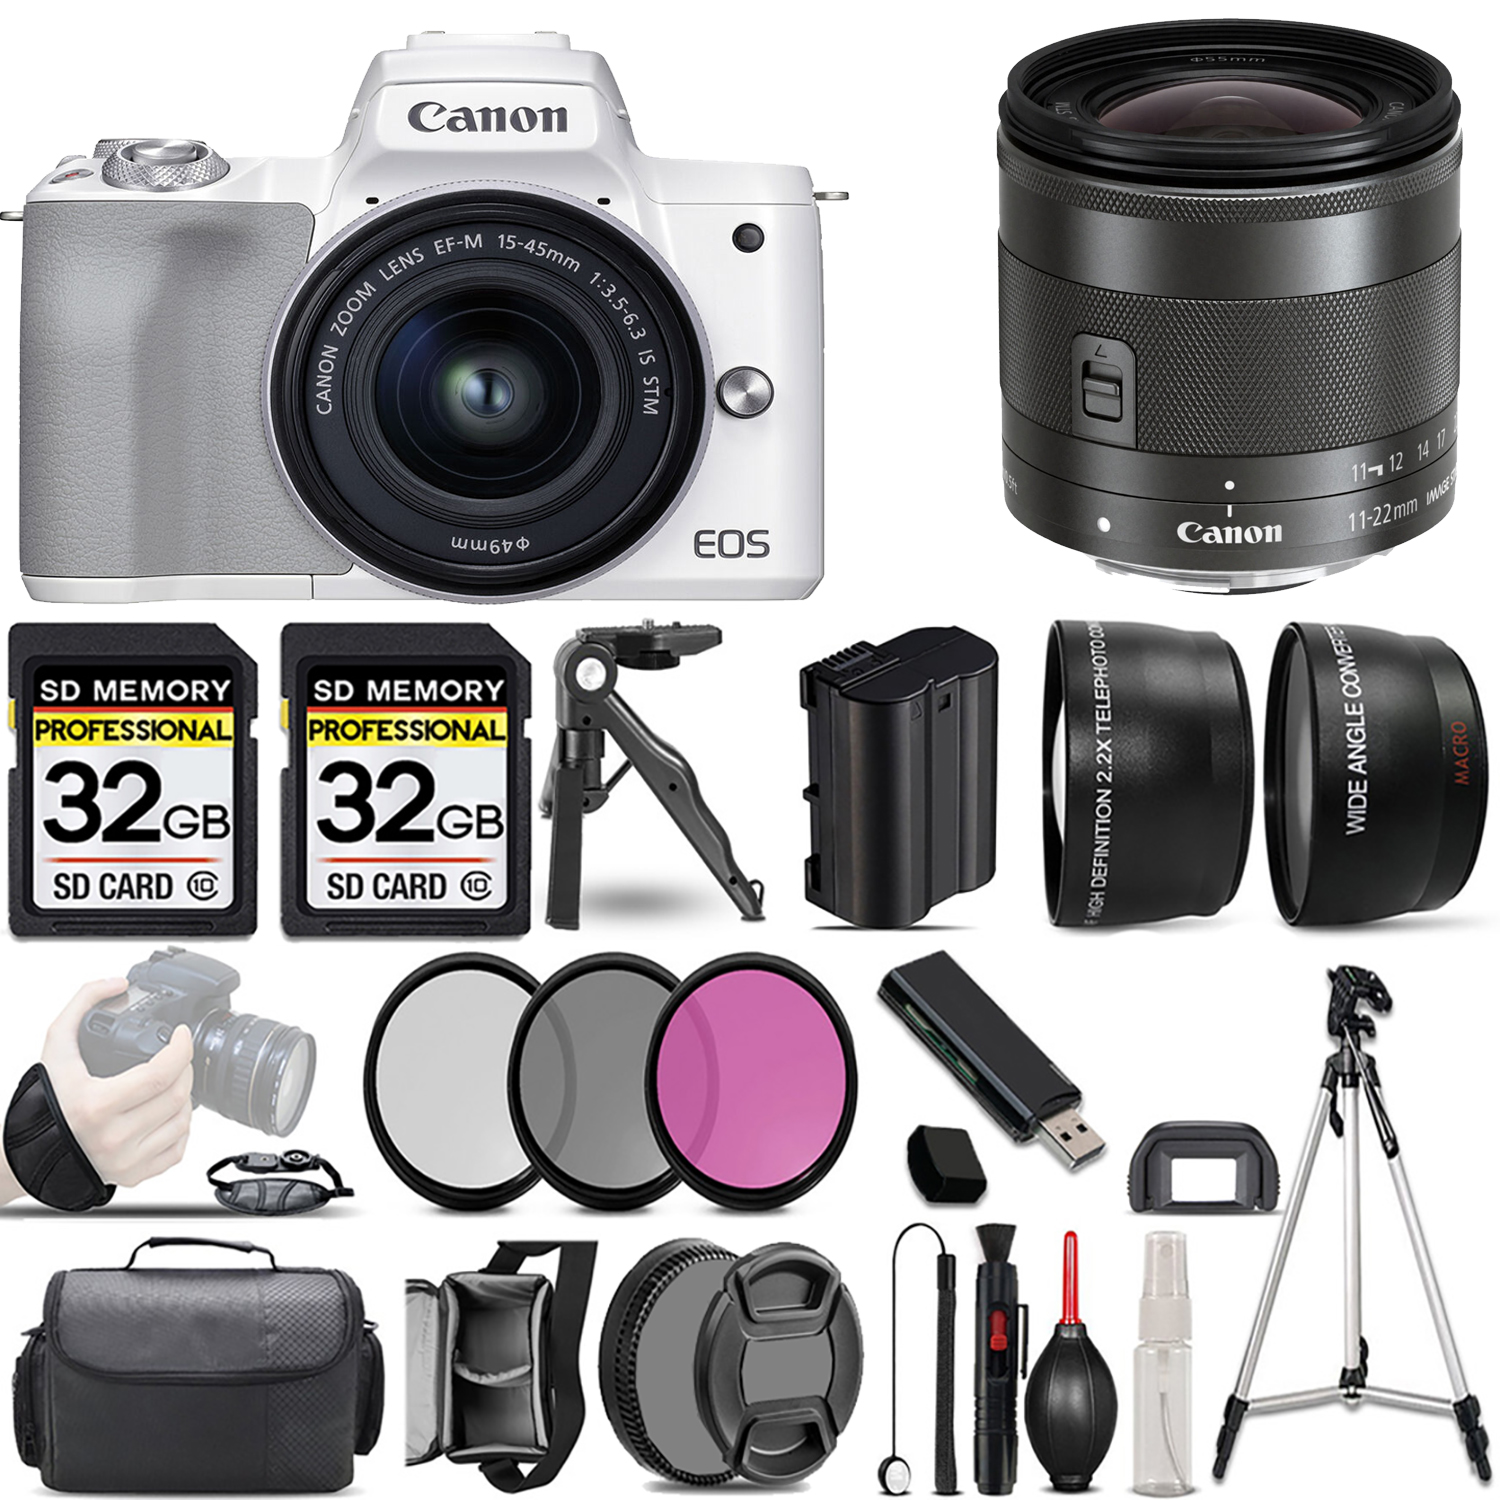 M50 Mark II + 15-45mm Lens (White) + 11-22mm IS STM Lens + 3 Piece Filter Set + 64GB *FREE SHIPPING*